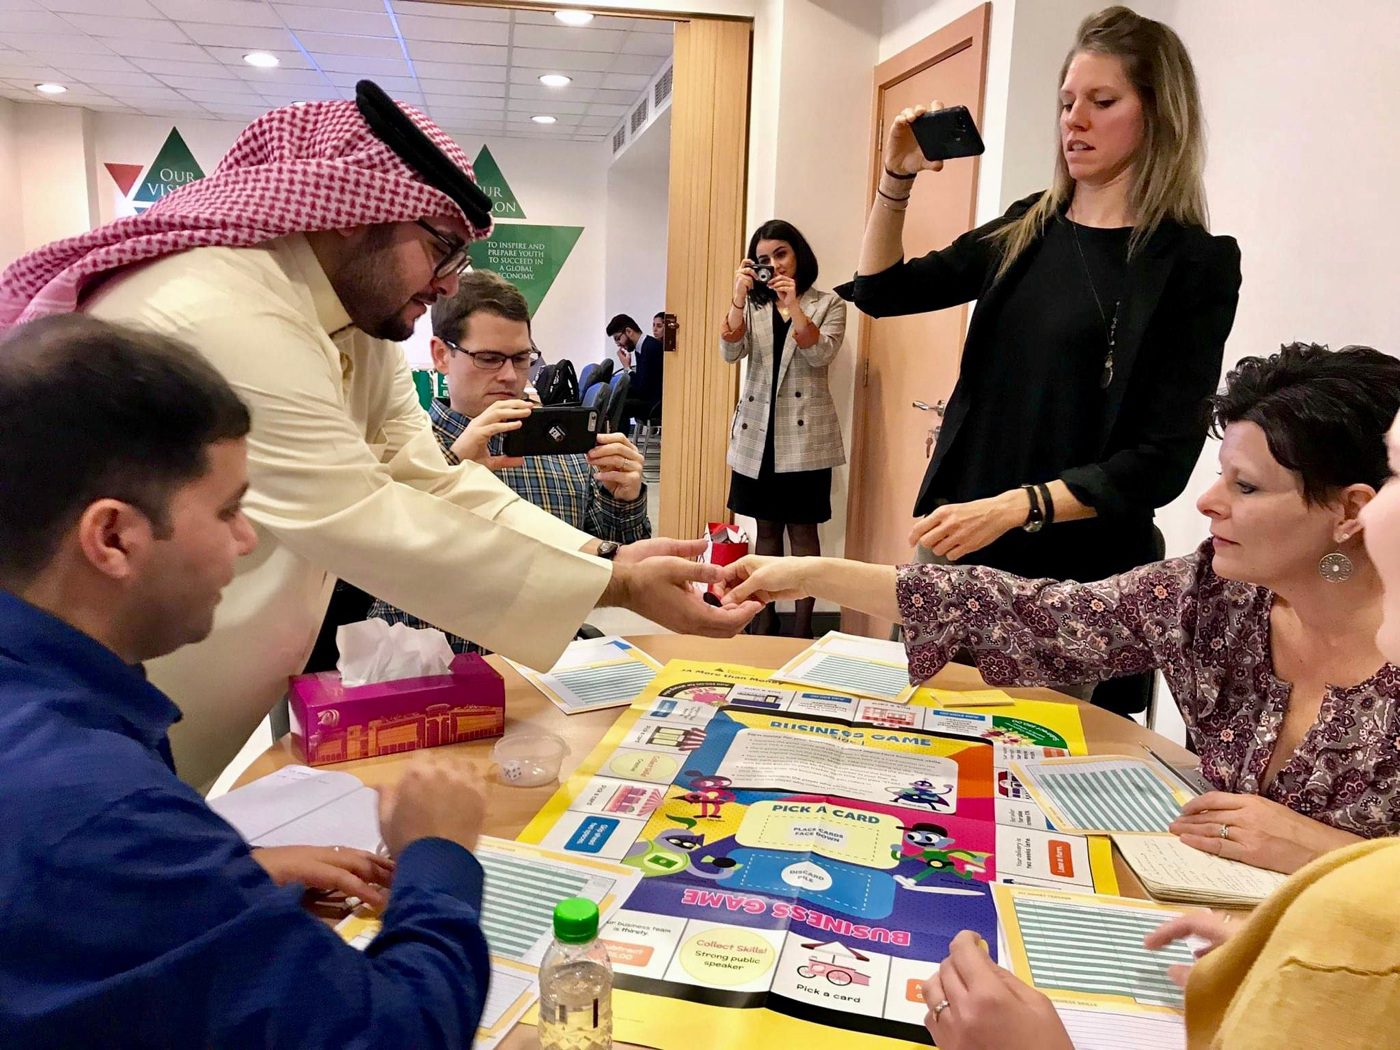 Crossing cultures and connecting in Bahrain.